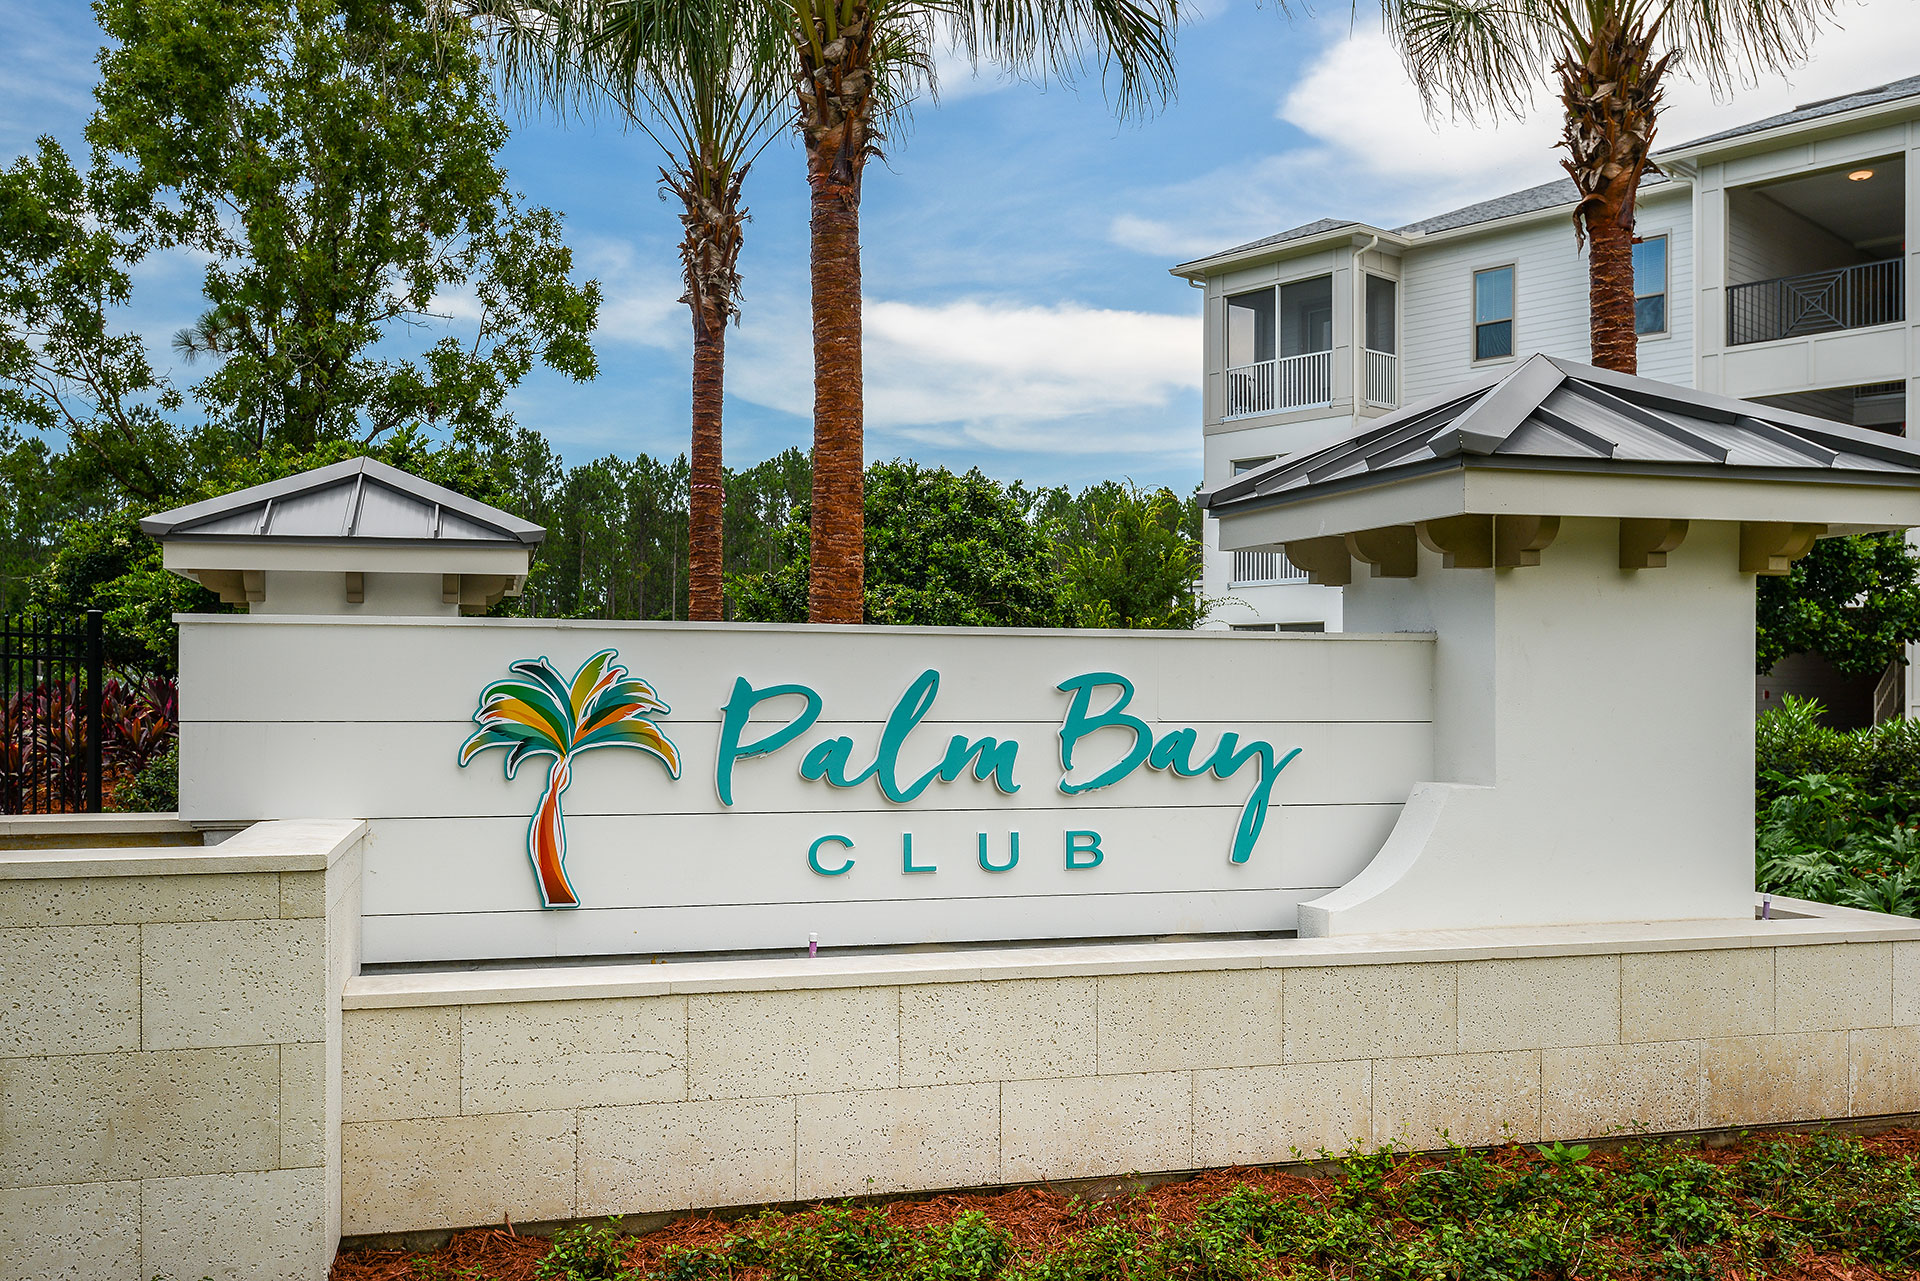 Front sign of Palm Bay Club complex with palm trees